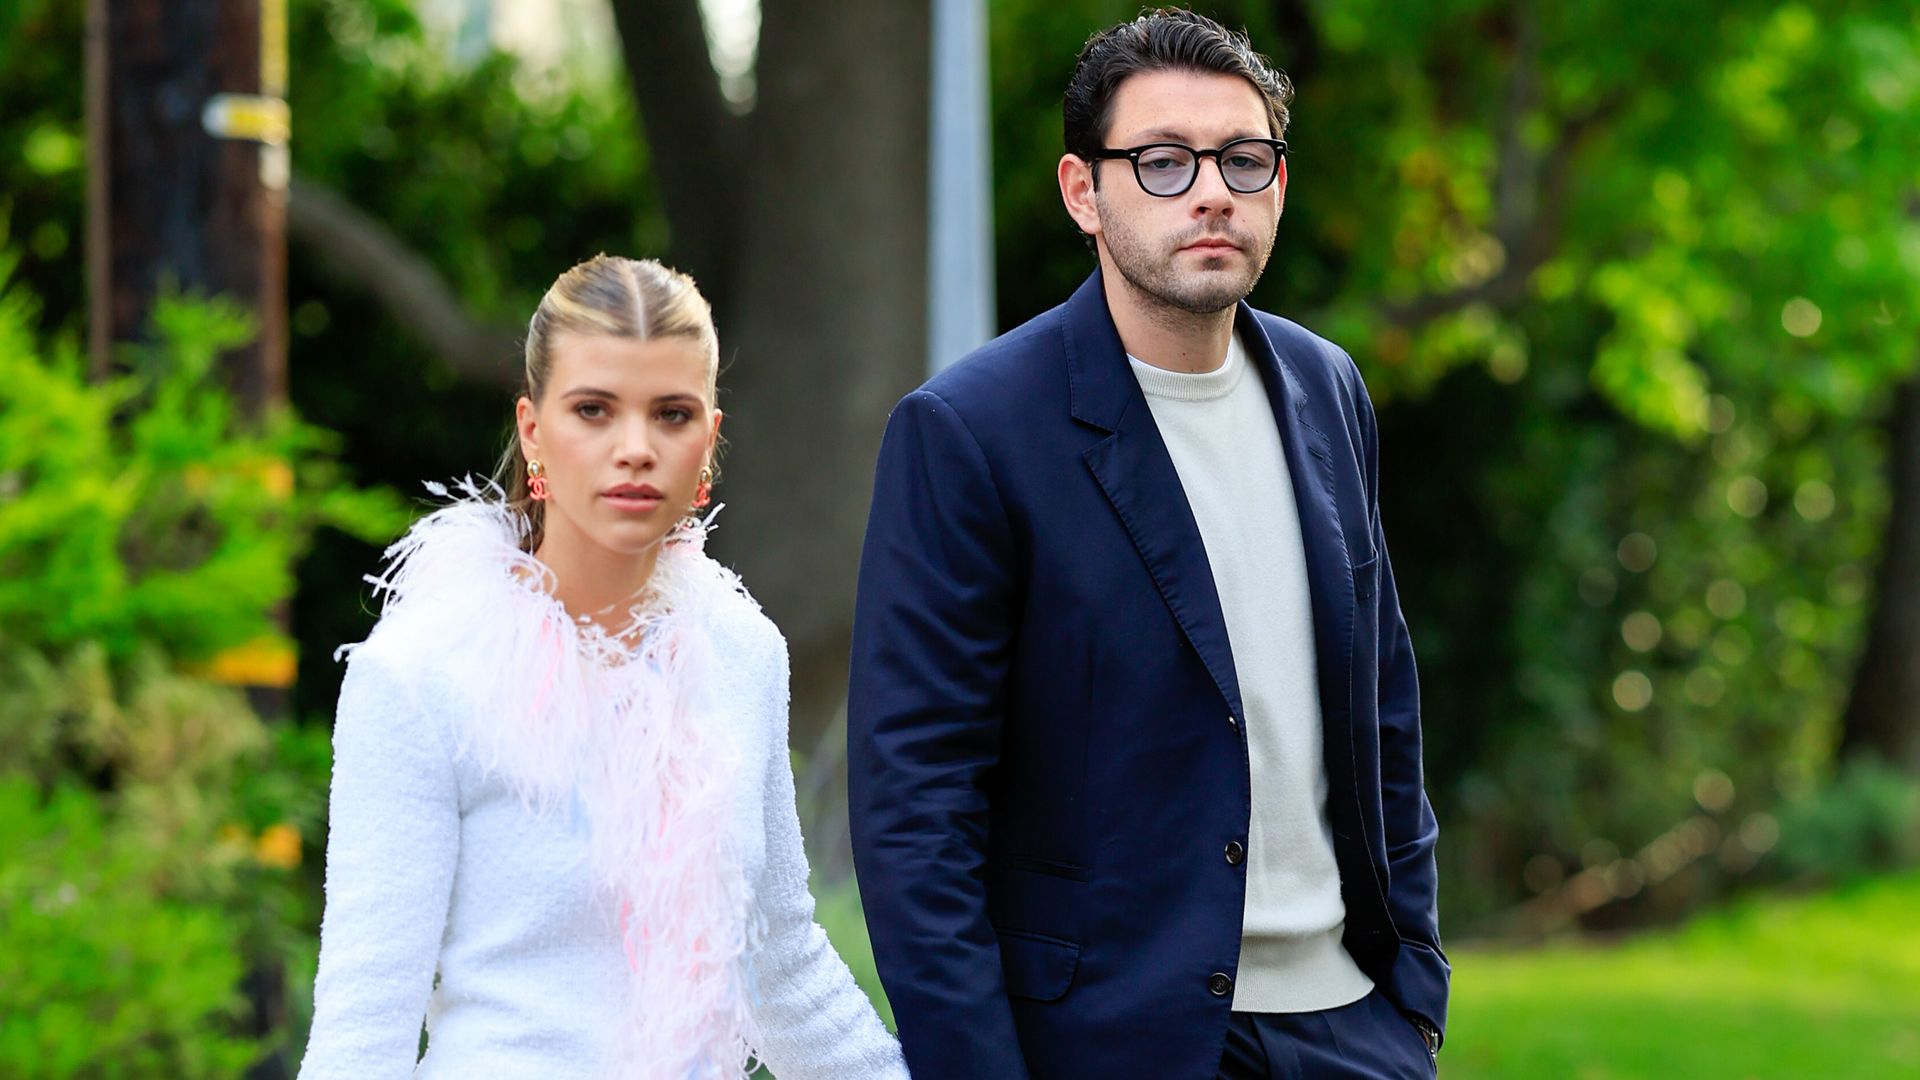 Sofia Richie Grainge and Elliot Grainge are seen going to a Chanel event on May 09, 2023